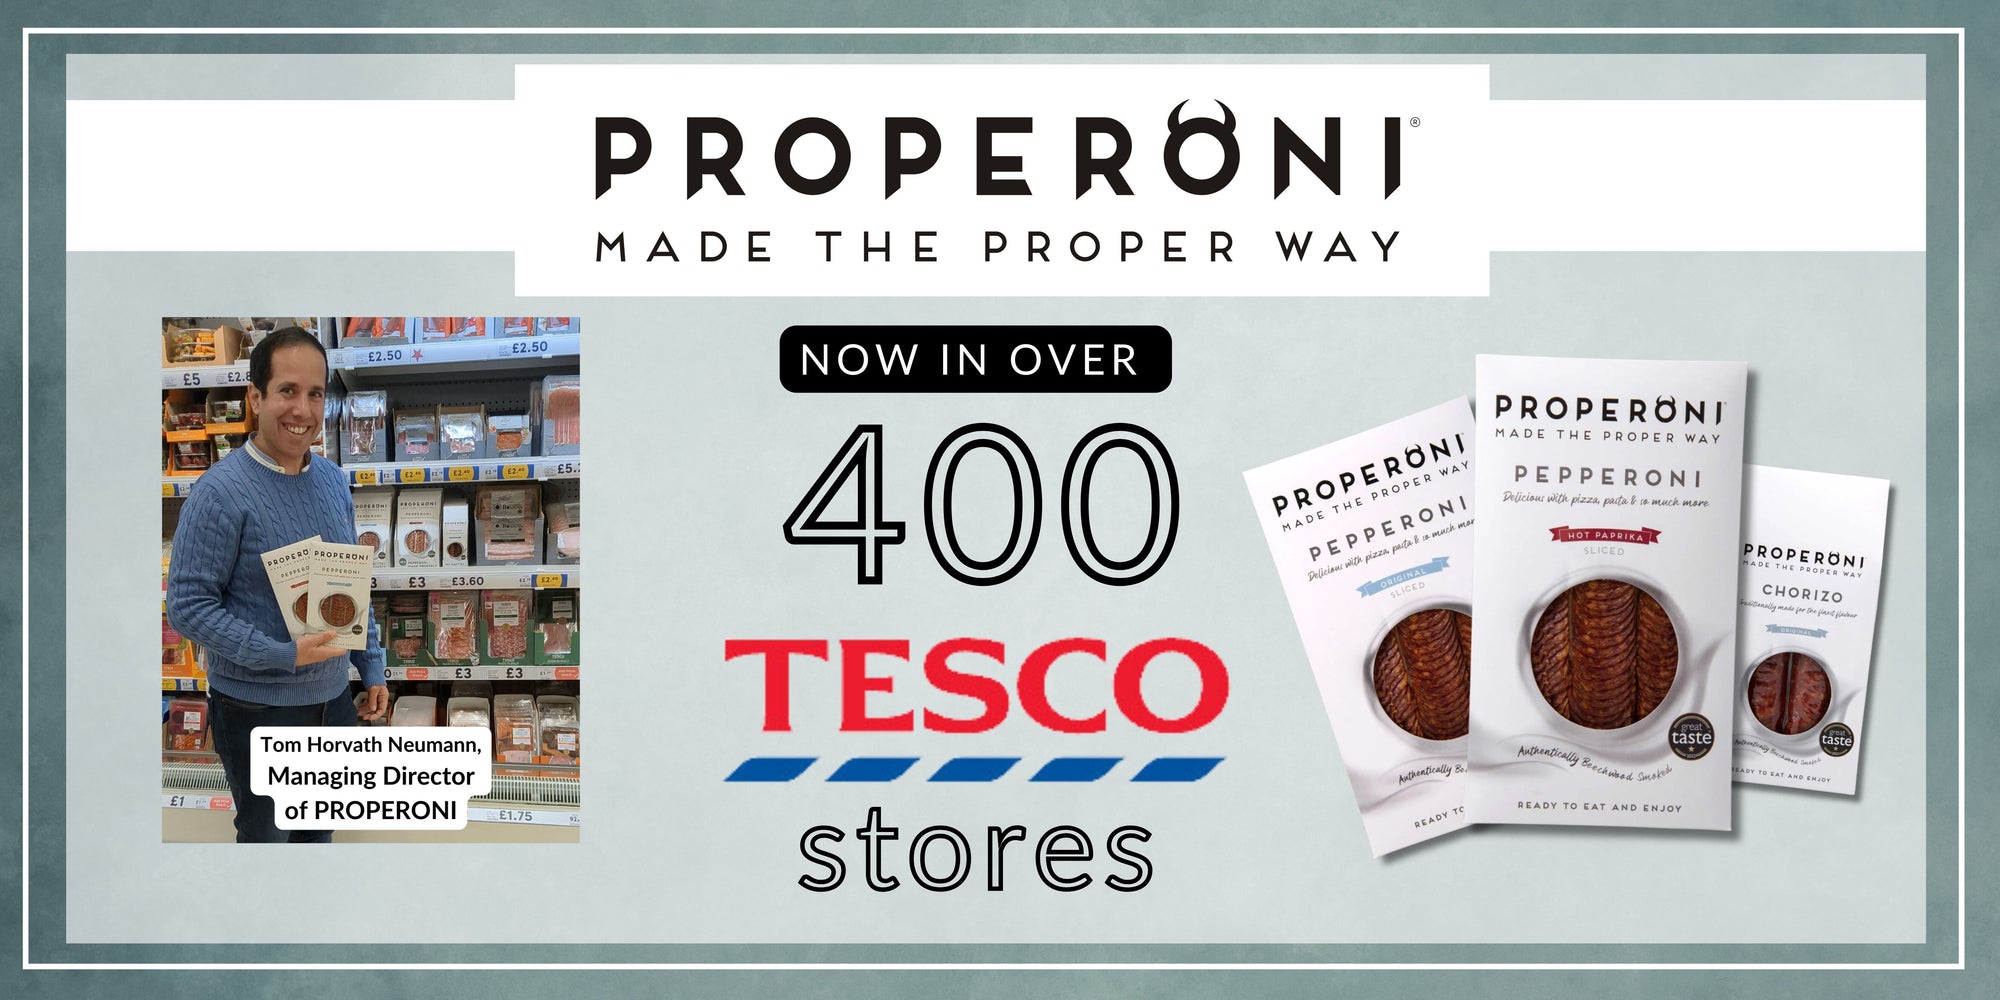 PROPERONI® Launches in over 400 TESCO Stores